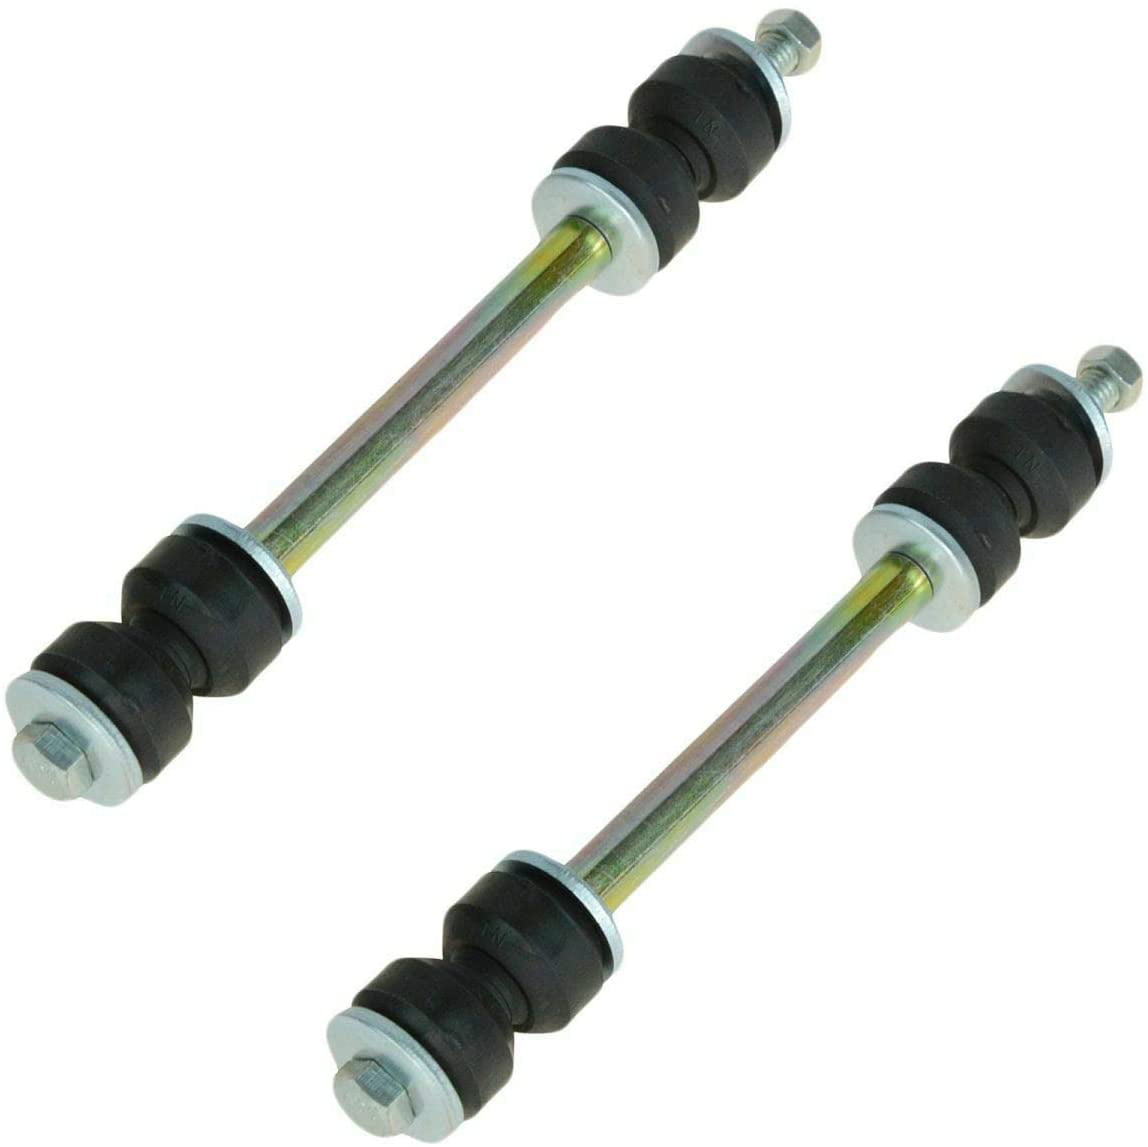 Rear Sway Stabilizer Bar End Link Pair Set of 2 For Escalade Hummer Jeep GM